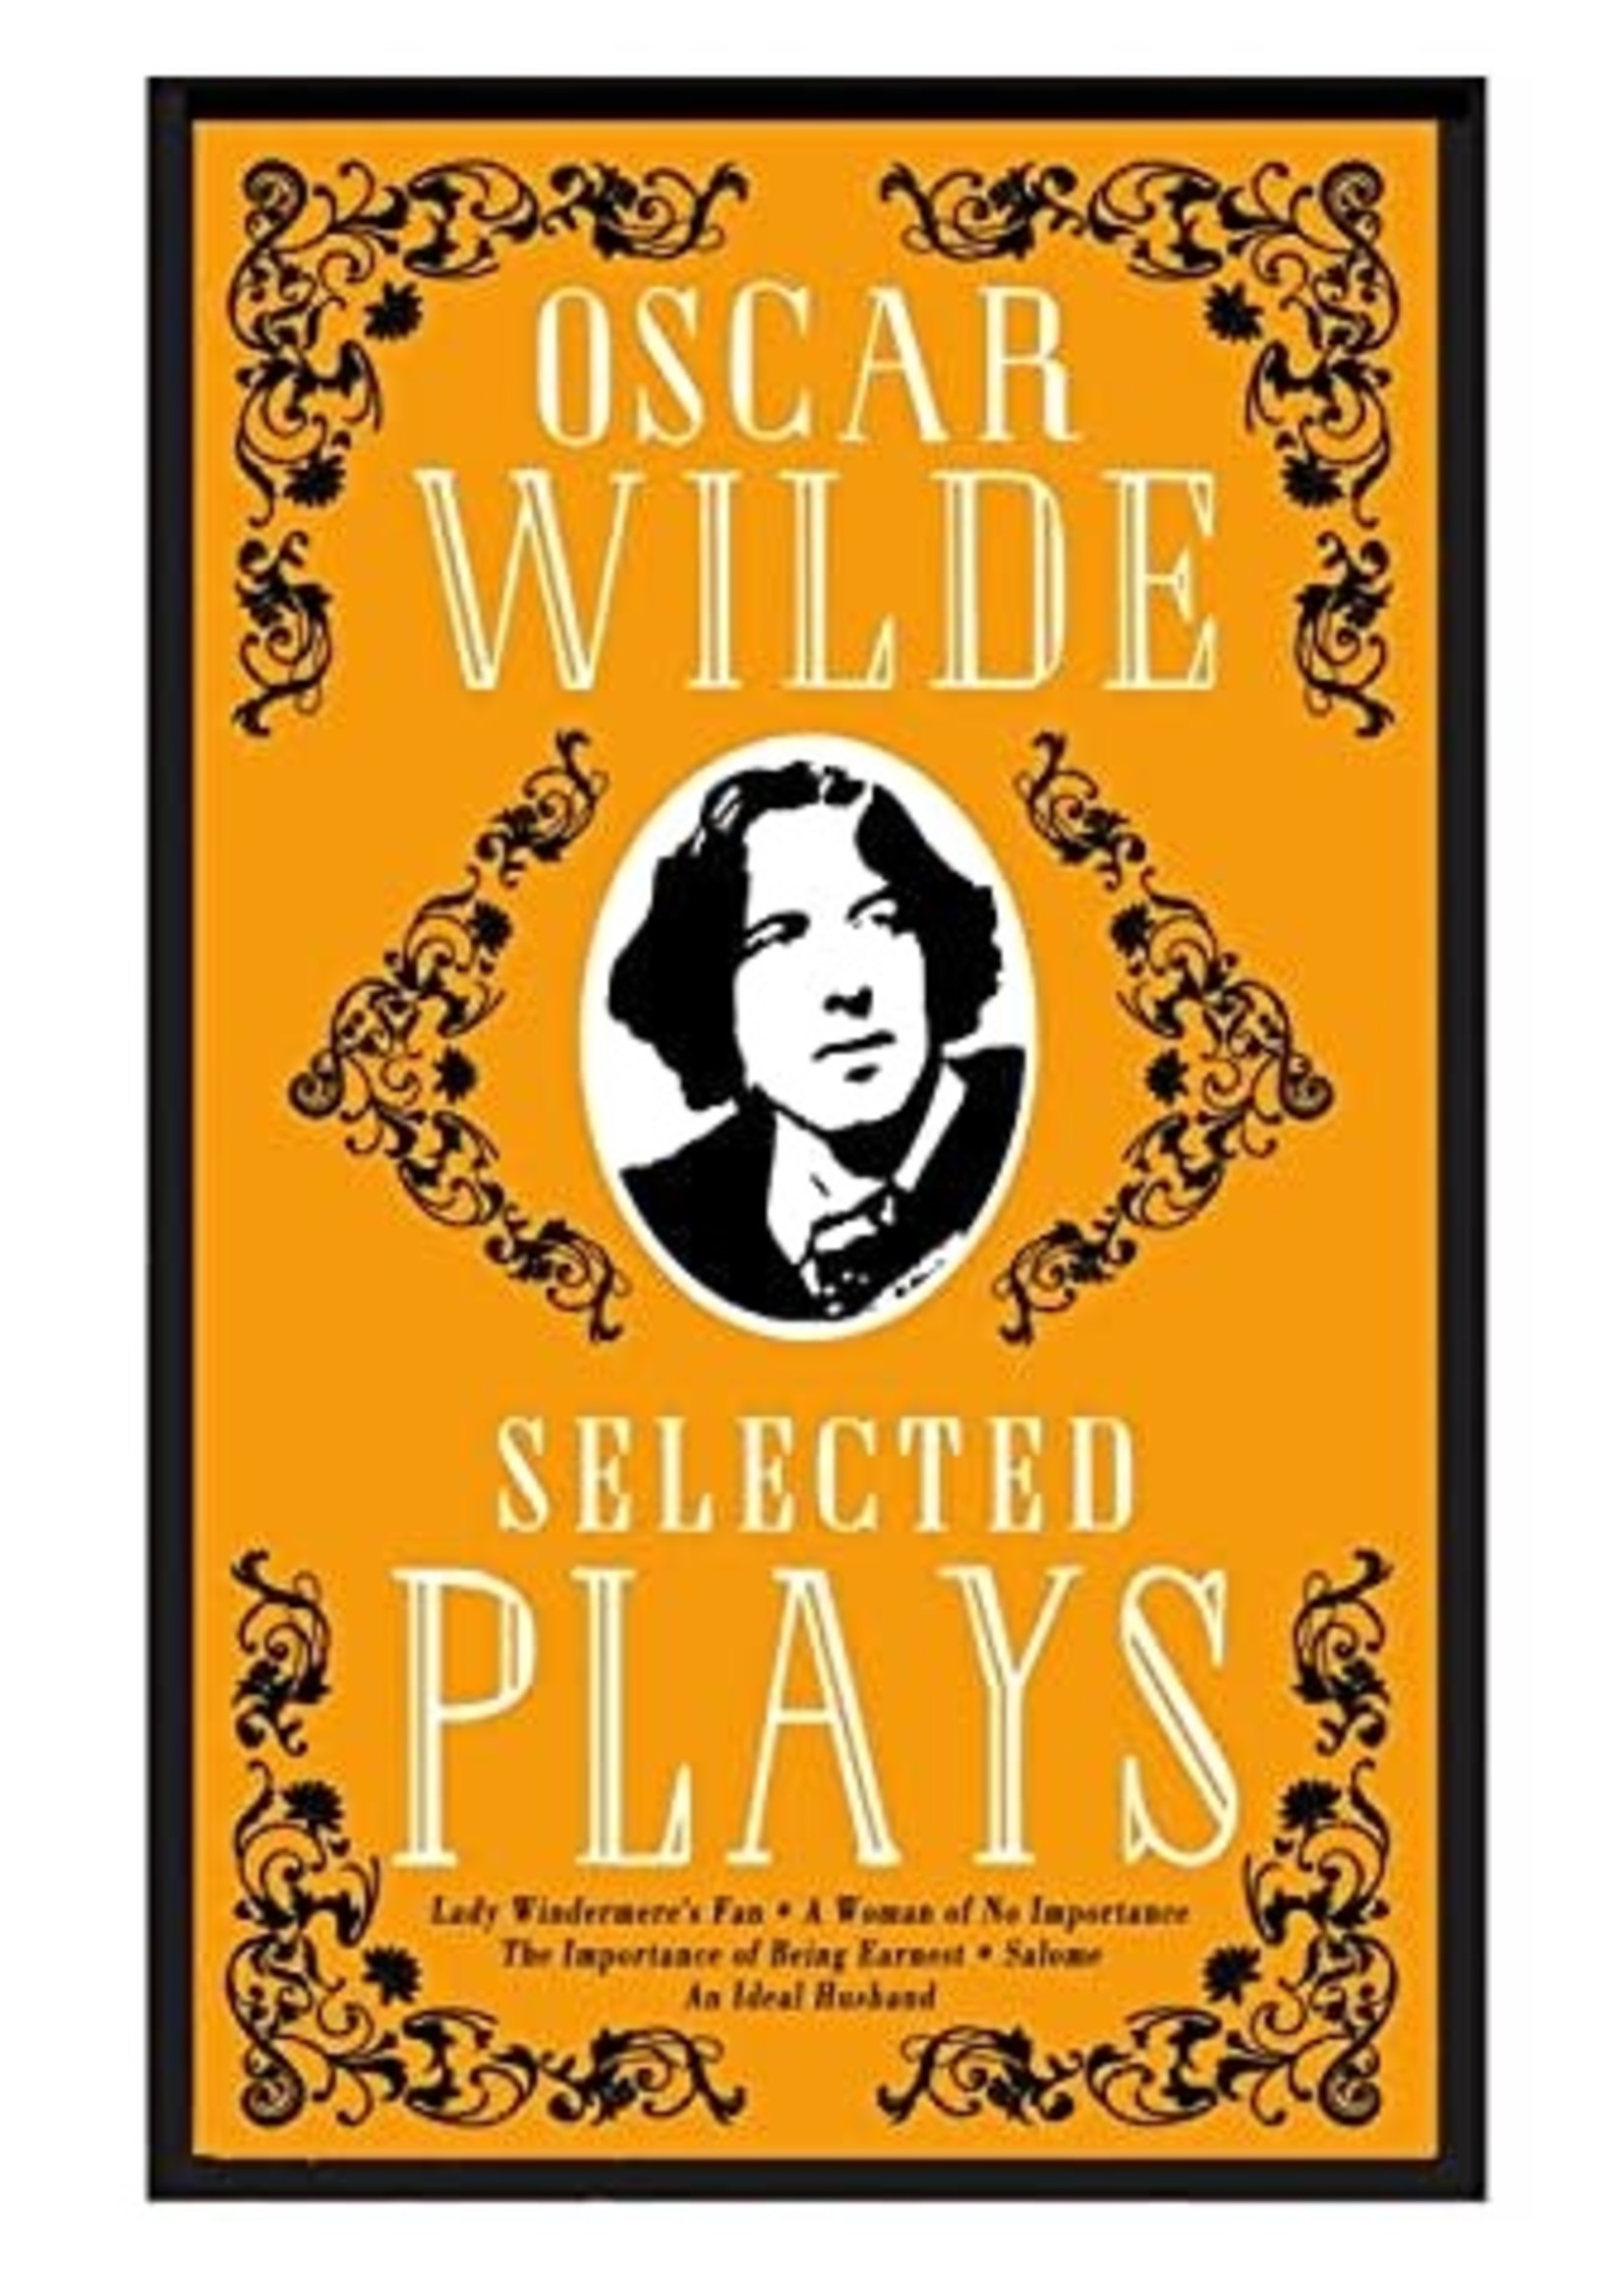 Selected Plays by Oscar Wilde